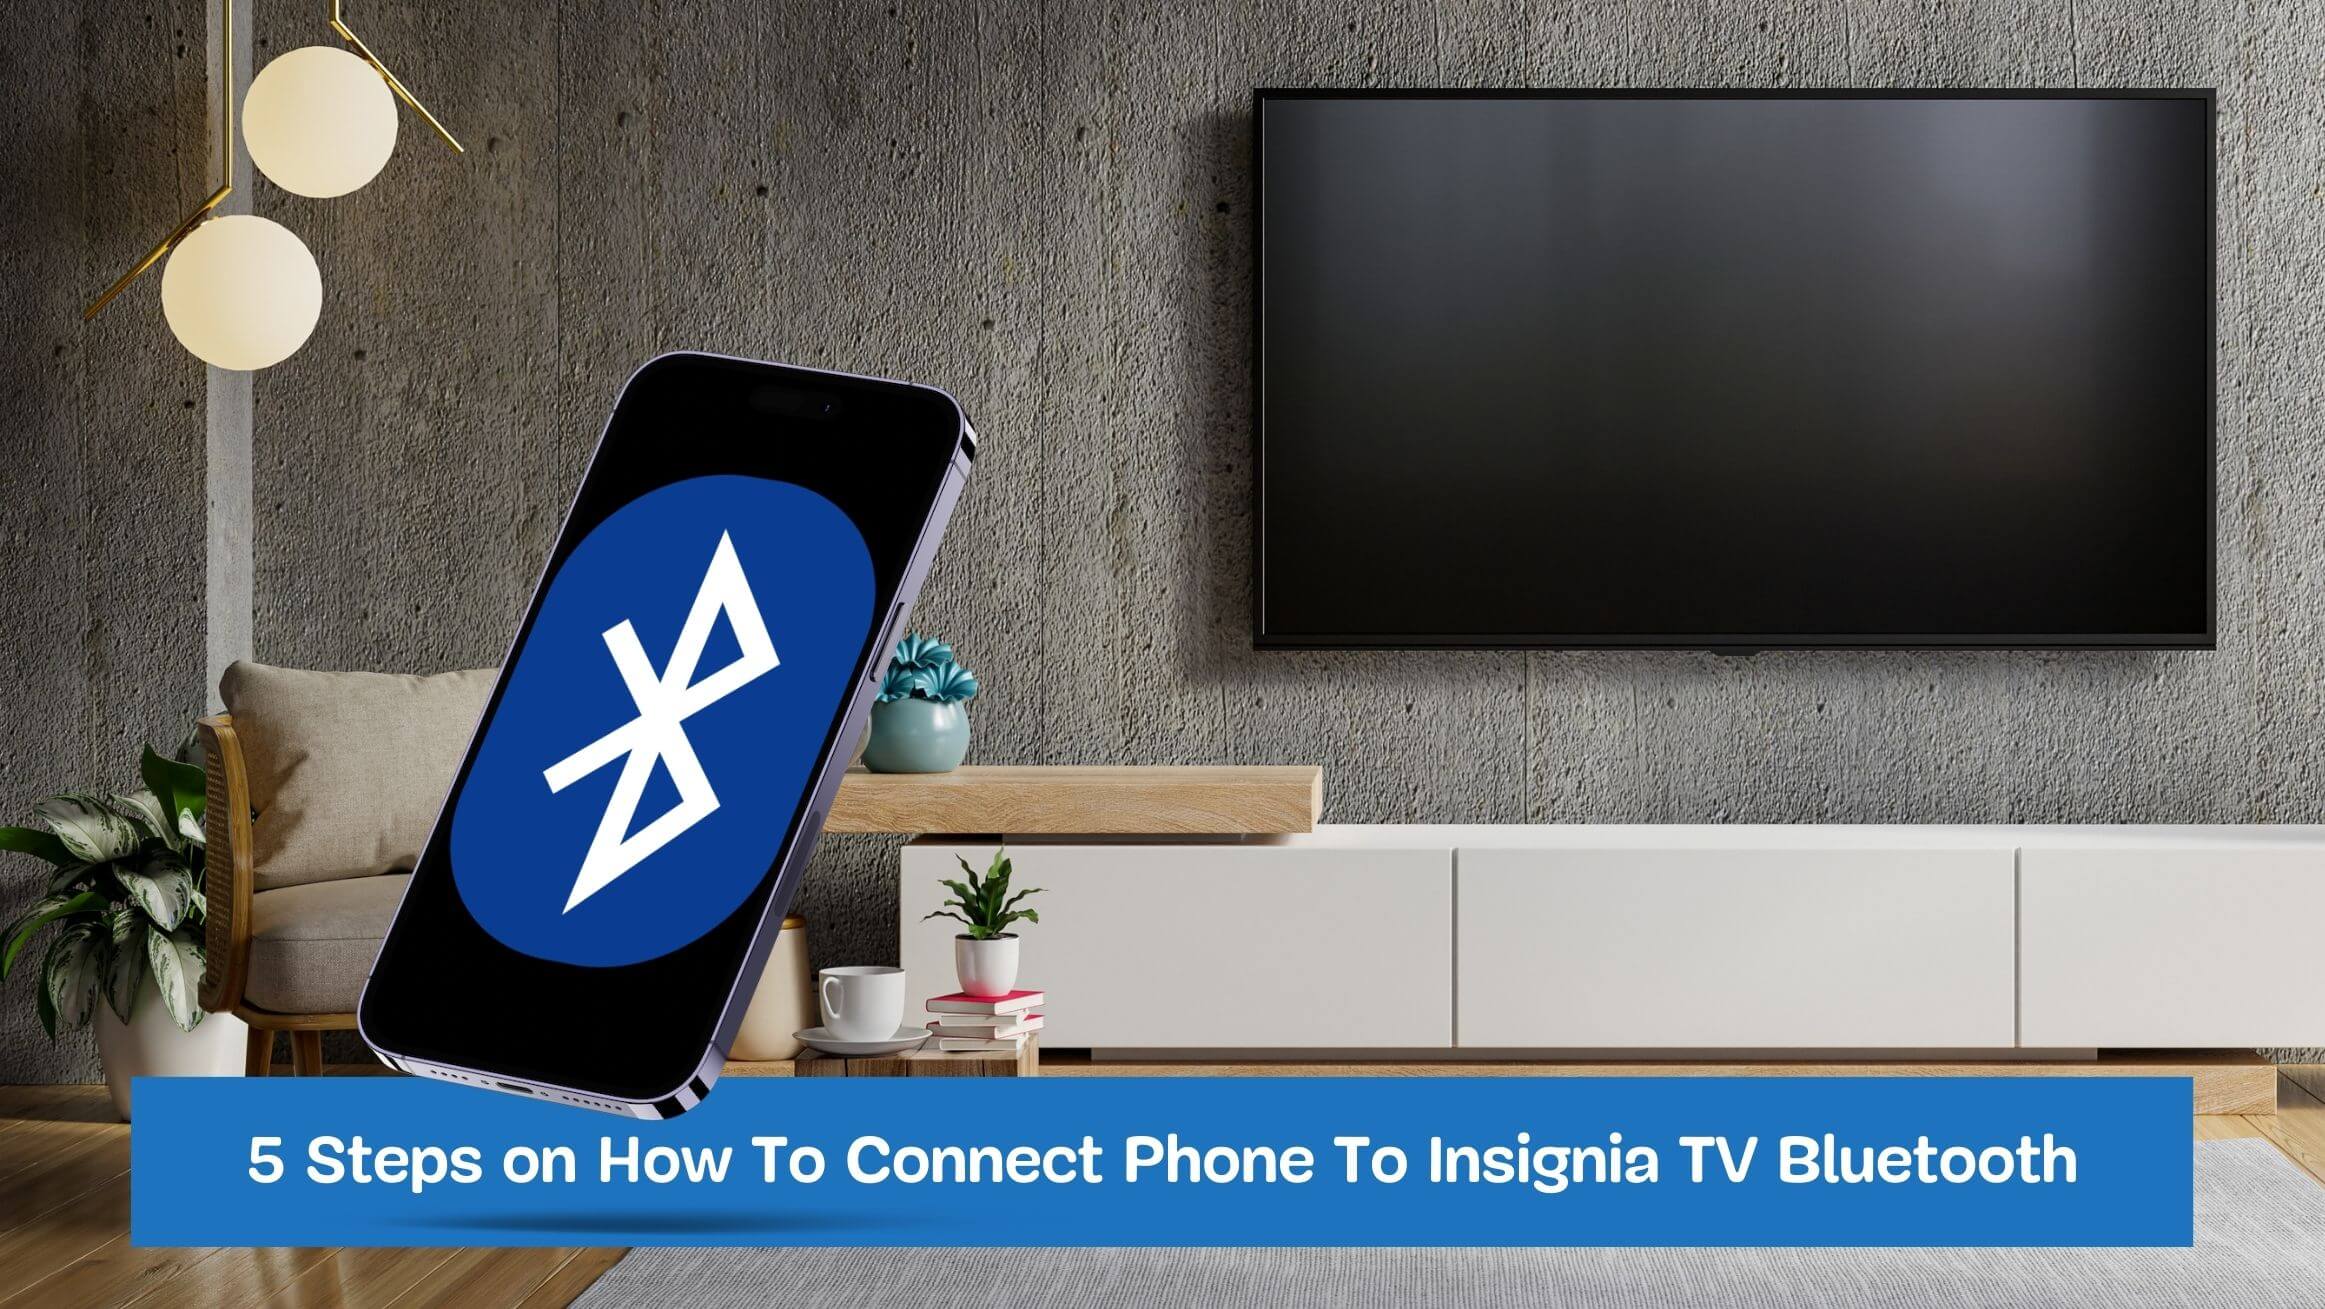 5 Steps on How To Connect Phone To Insignia TV Bluetooth